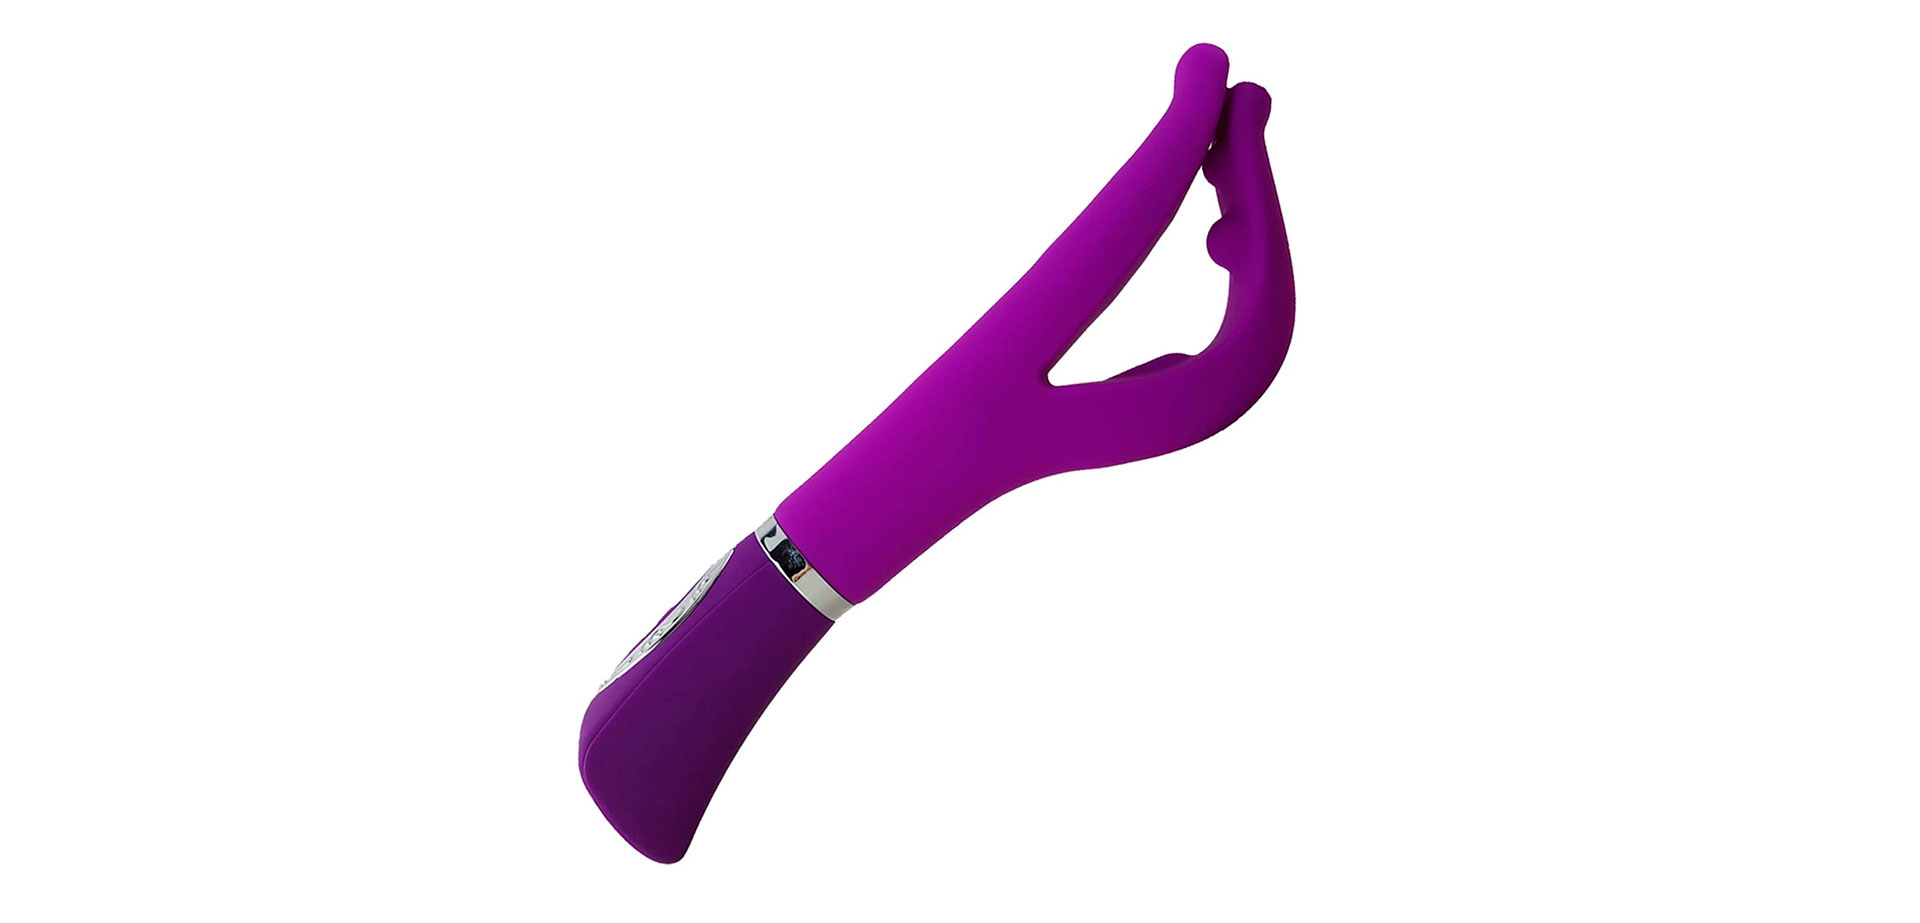 Powerful Clit Vibrators for Squirting.